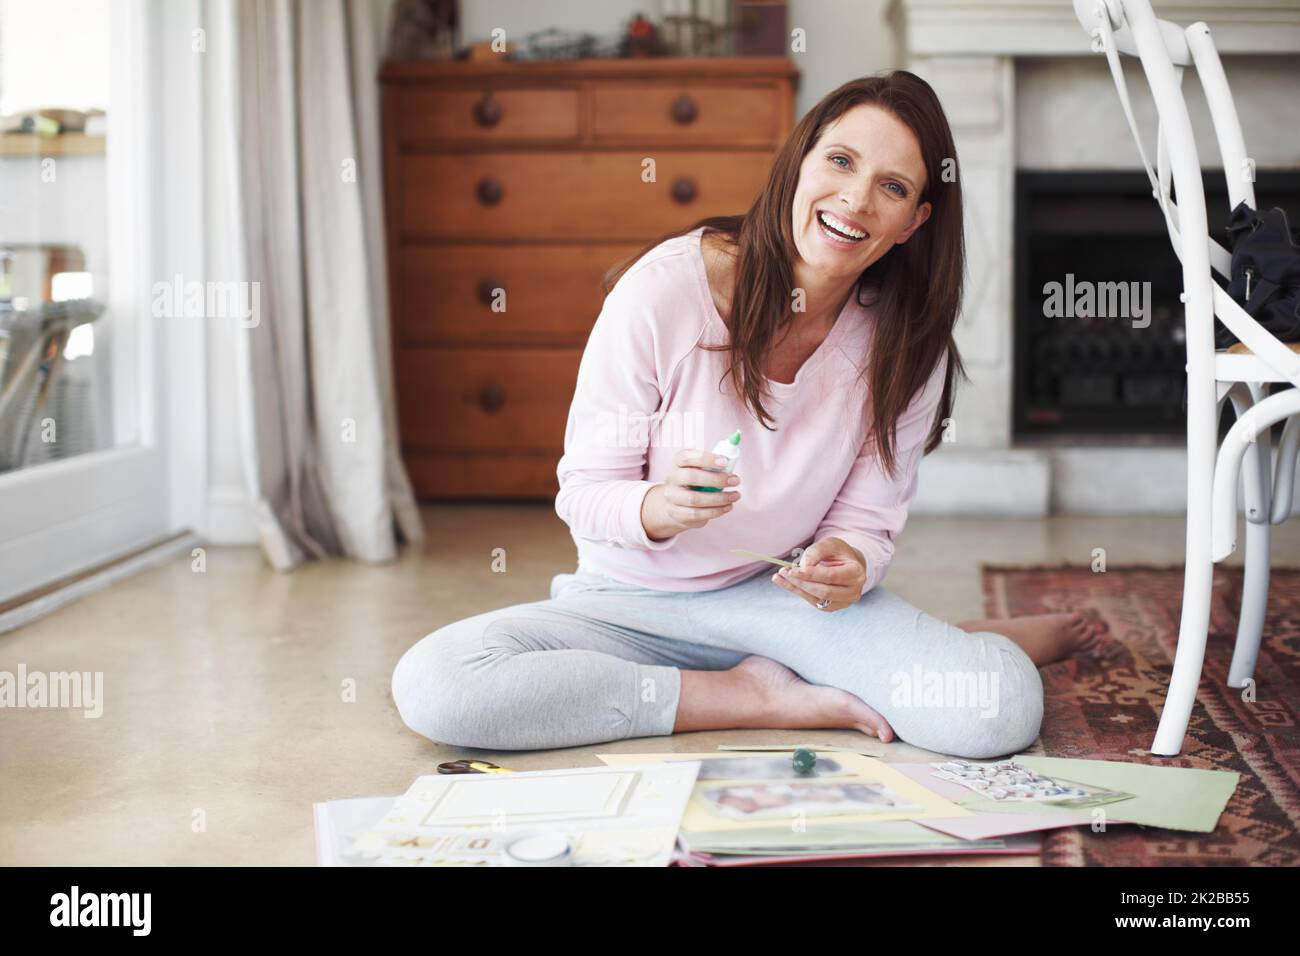 Shes enjoying her new hobby. A smiling woman working on a scrapbook while sitting on the floor in a home interior. Stock Photo